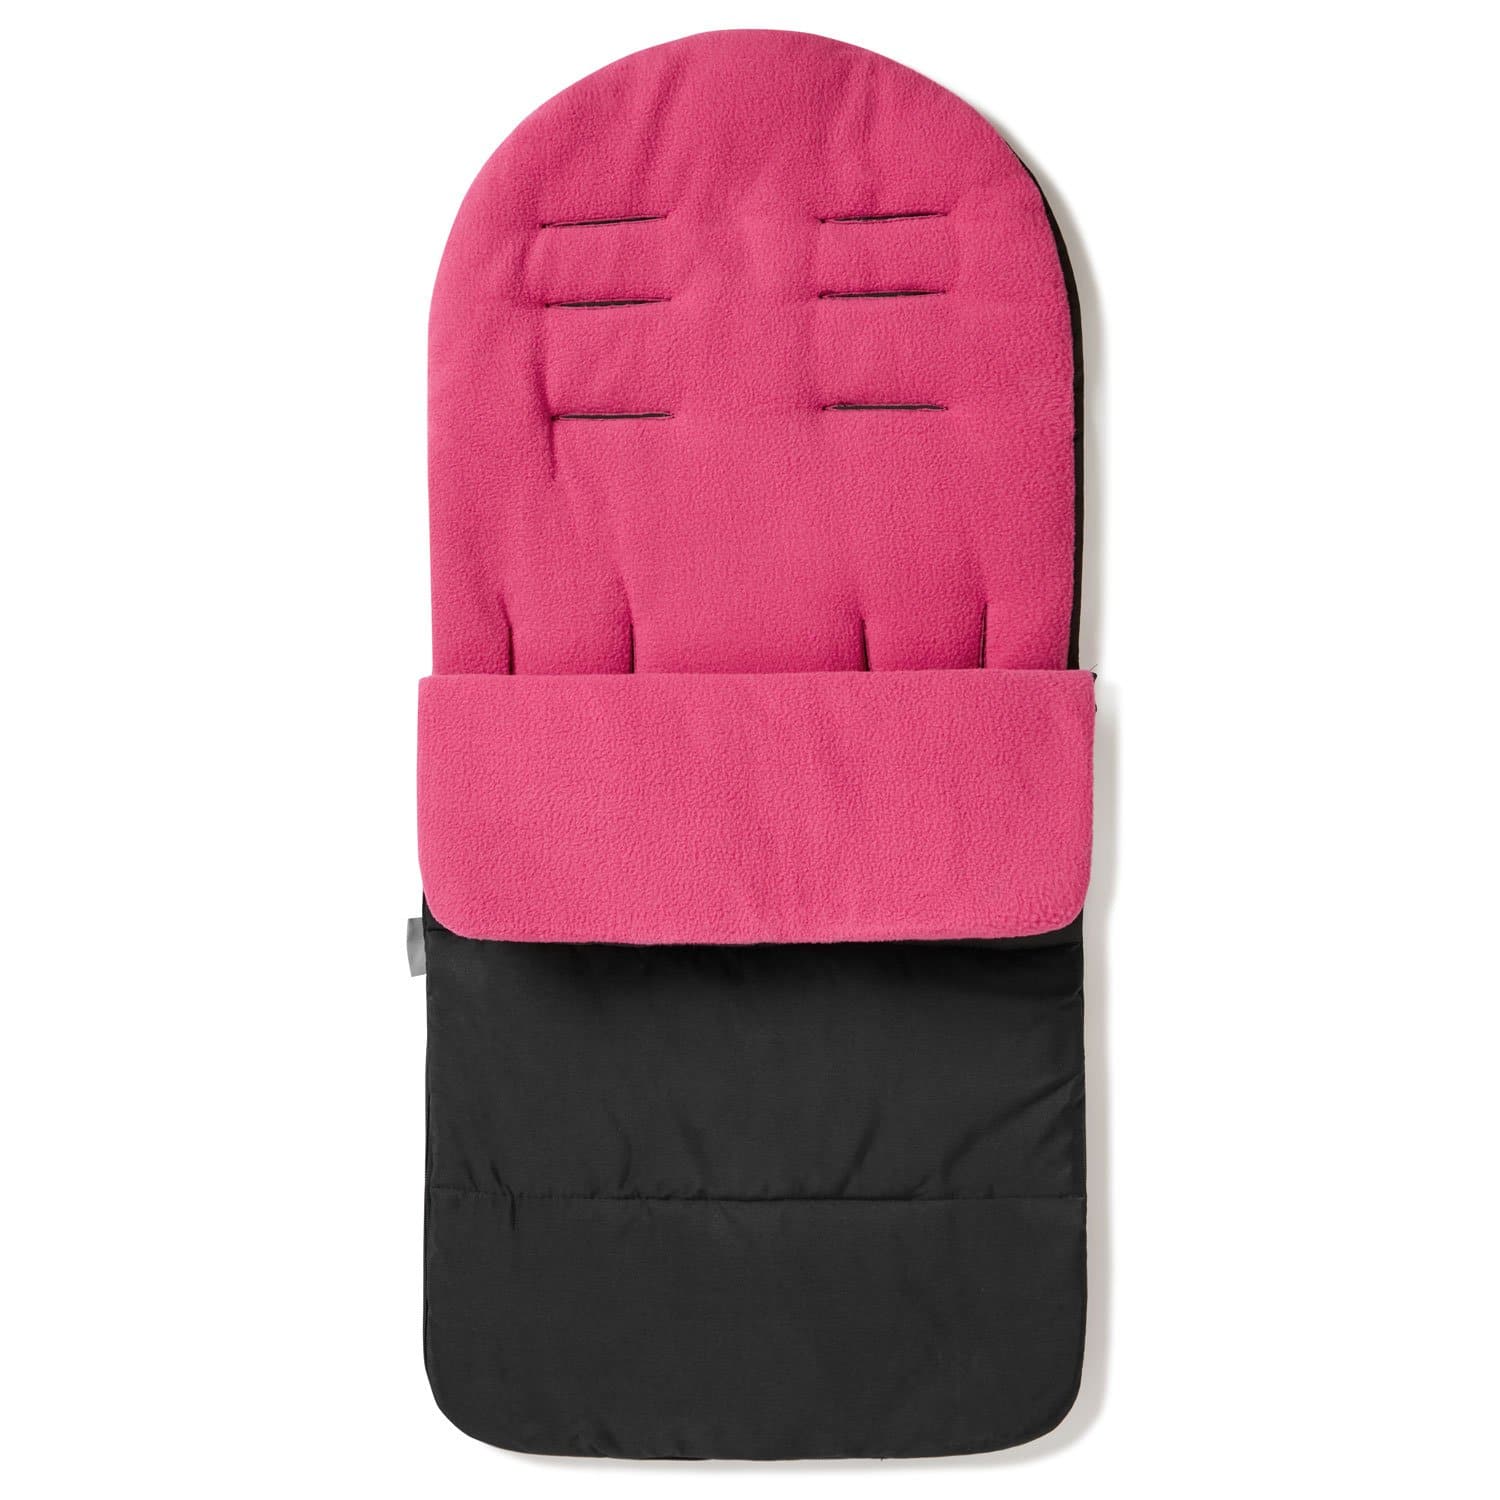 Premium Footmuff / Cosy Toes Compatible with Tutti Bambini - Pink Rose / Fits All Models | For Your Little One